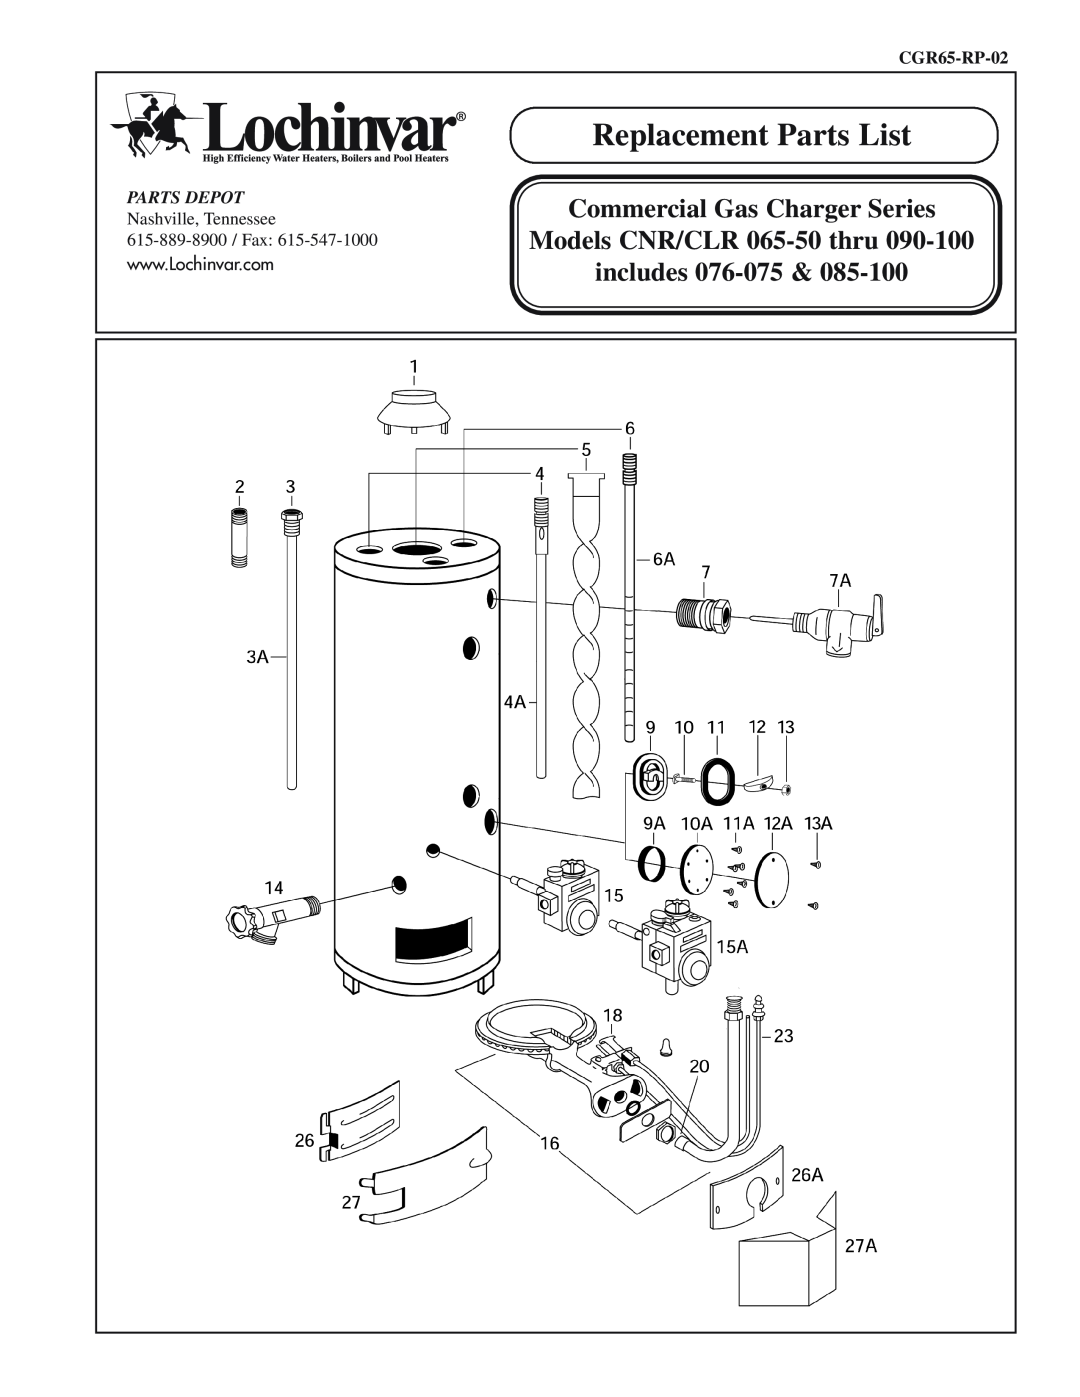 Lochinvar CLR 085-100 manual Replacement Parts List, Commercial Gas Charger Series, Models CNR/CLR 065-50thru includes 